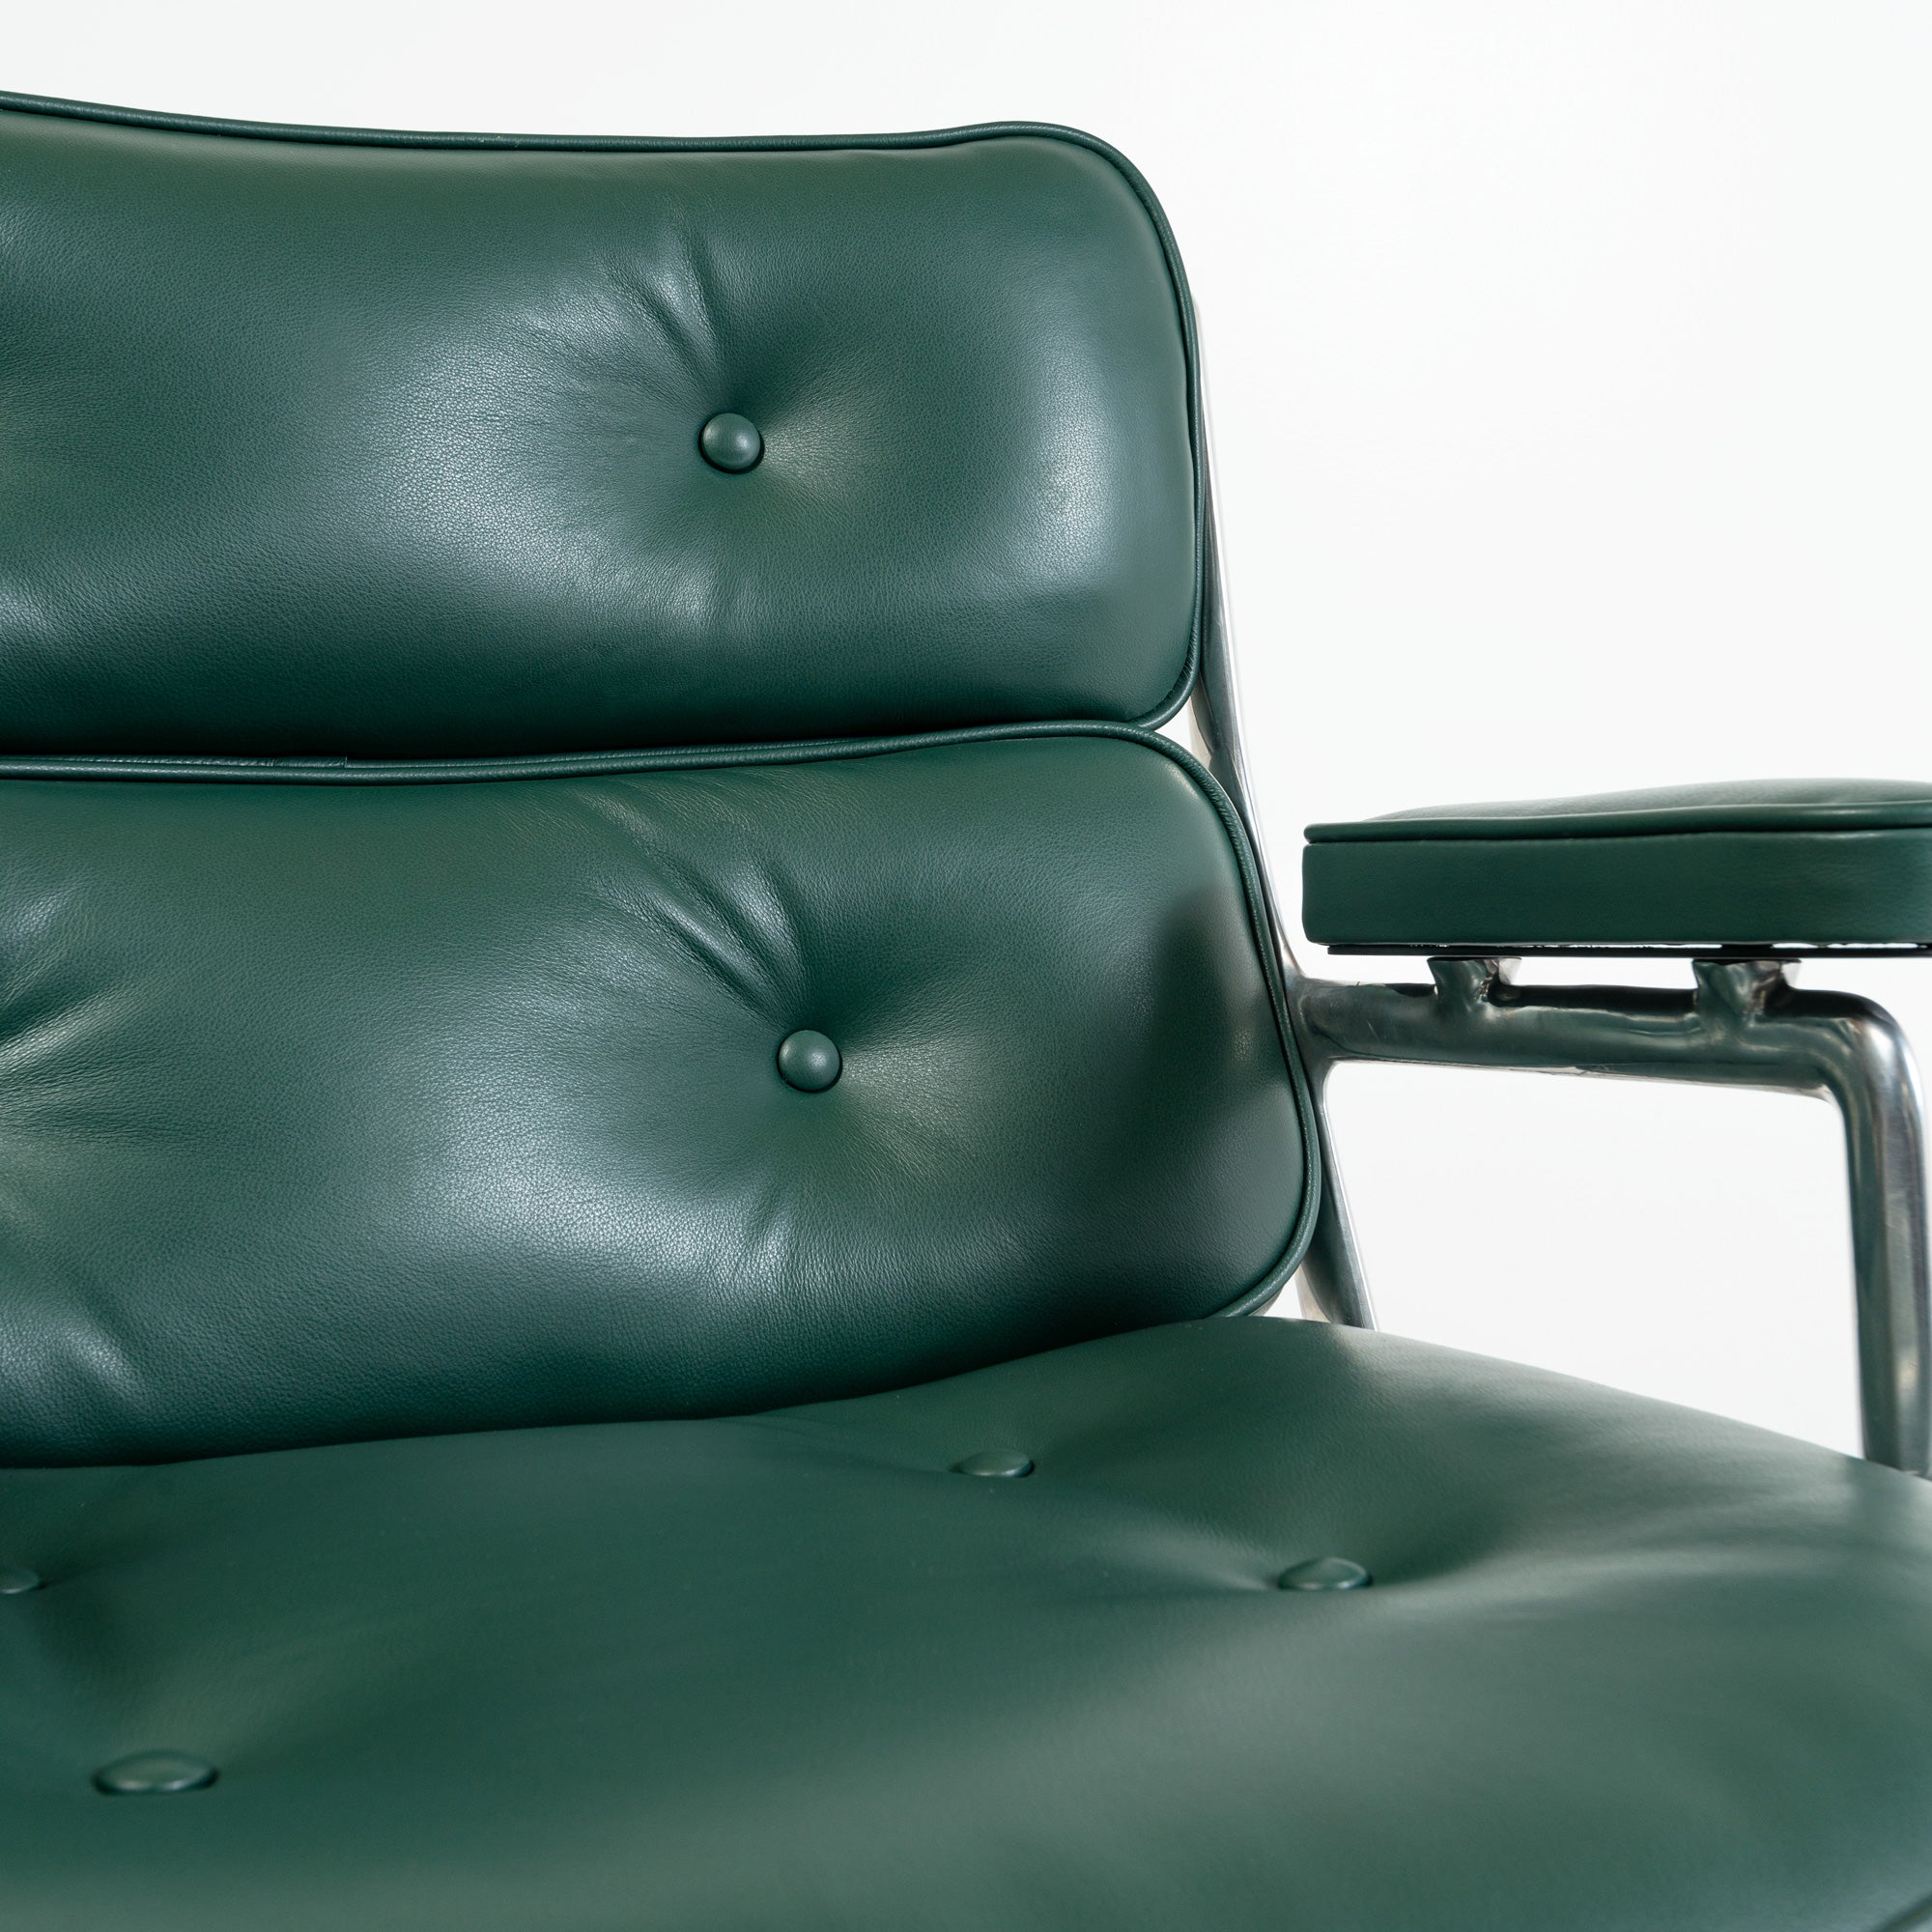 Eames Time Life Lobby Lounge Chair ES105 in Forest Green Leather